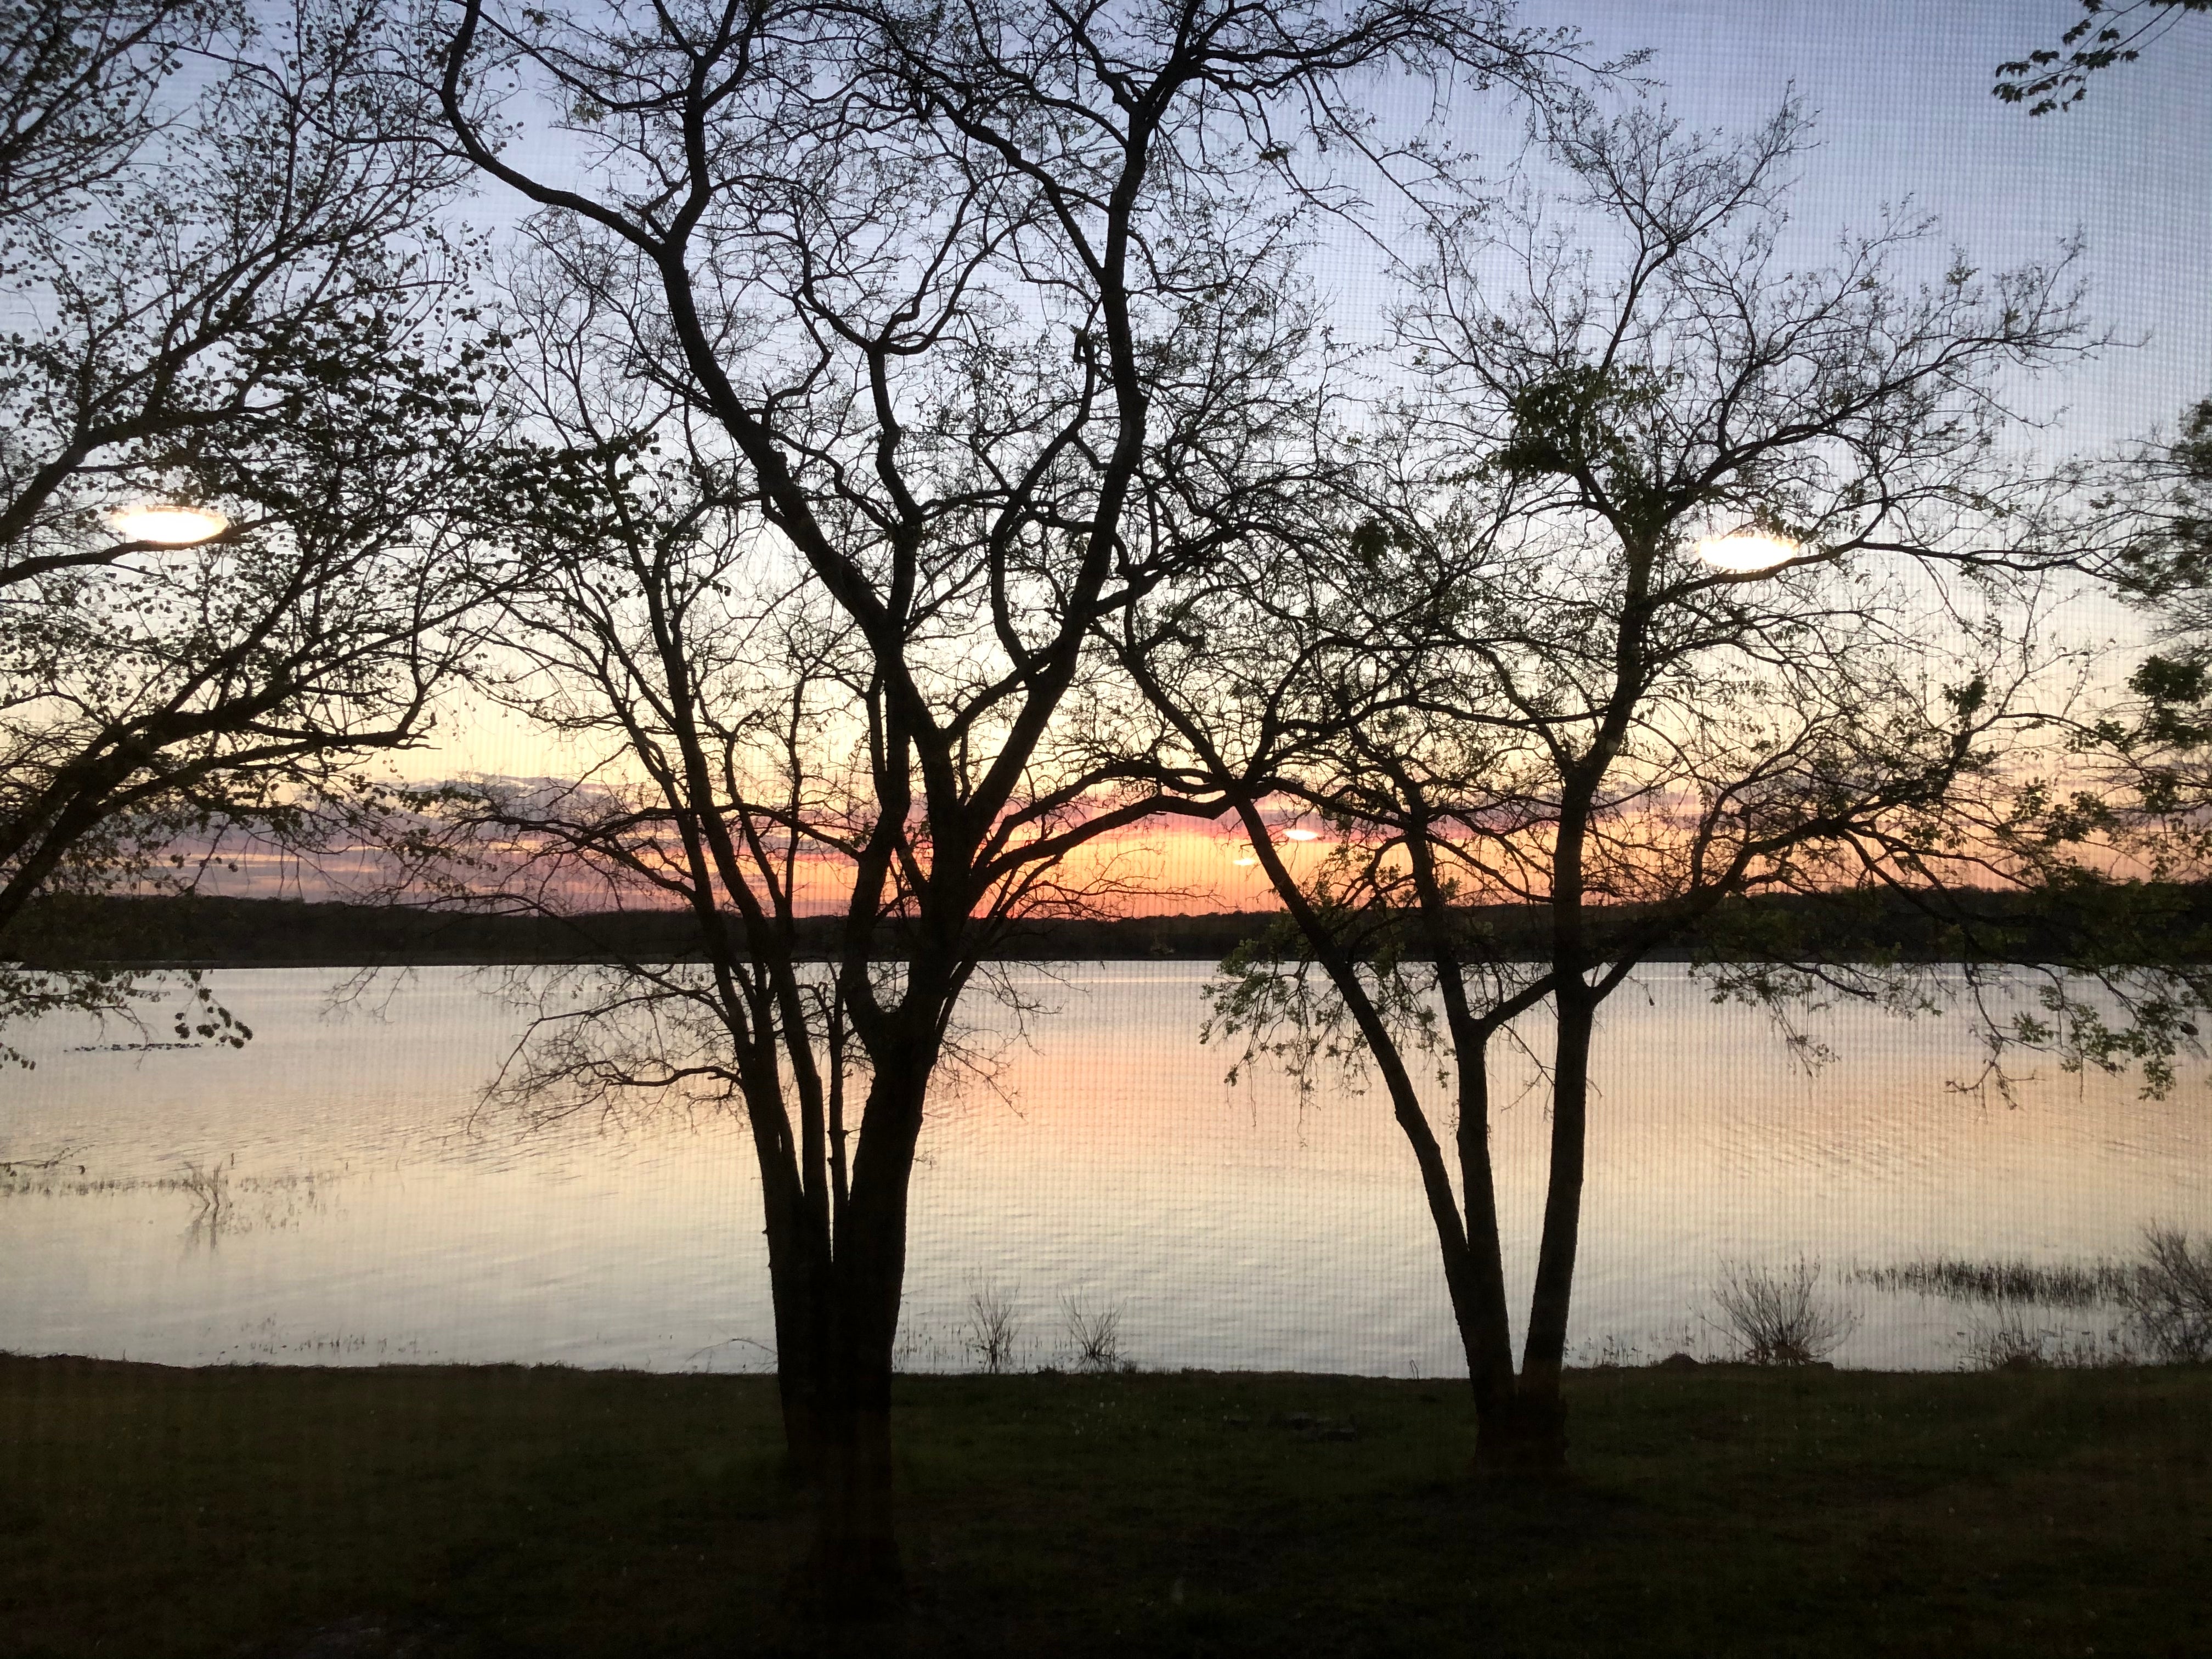 Camper submitted image from Pawnee Lake - 2